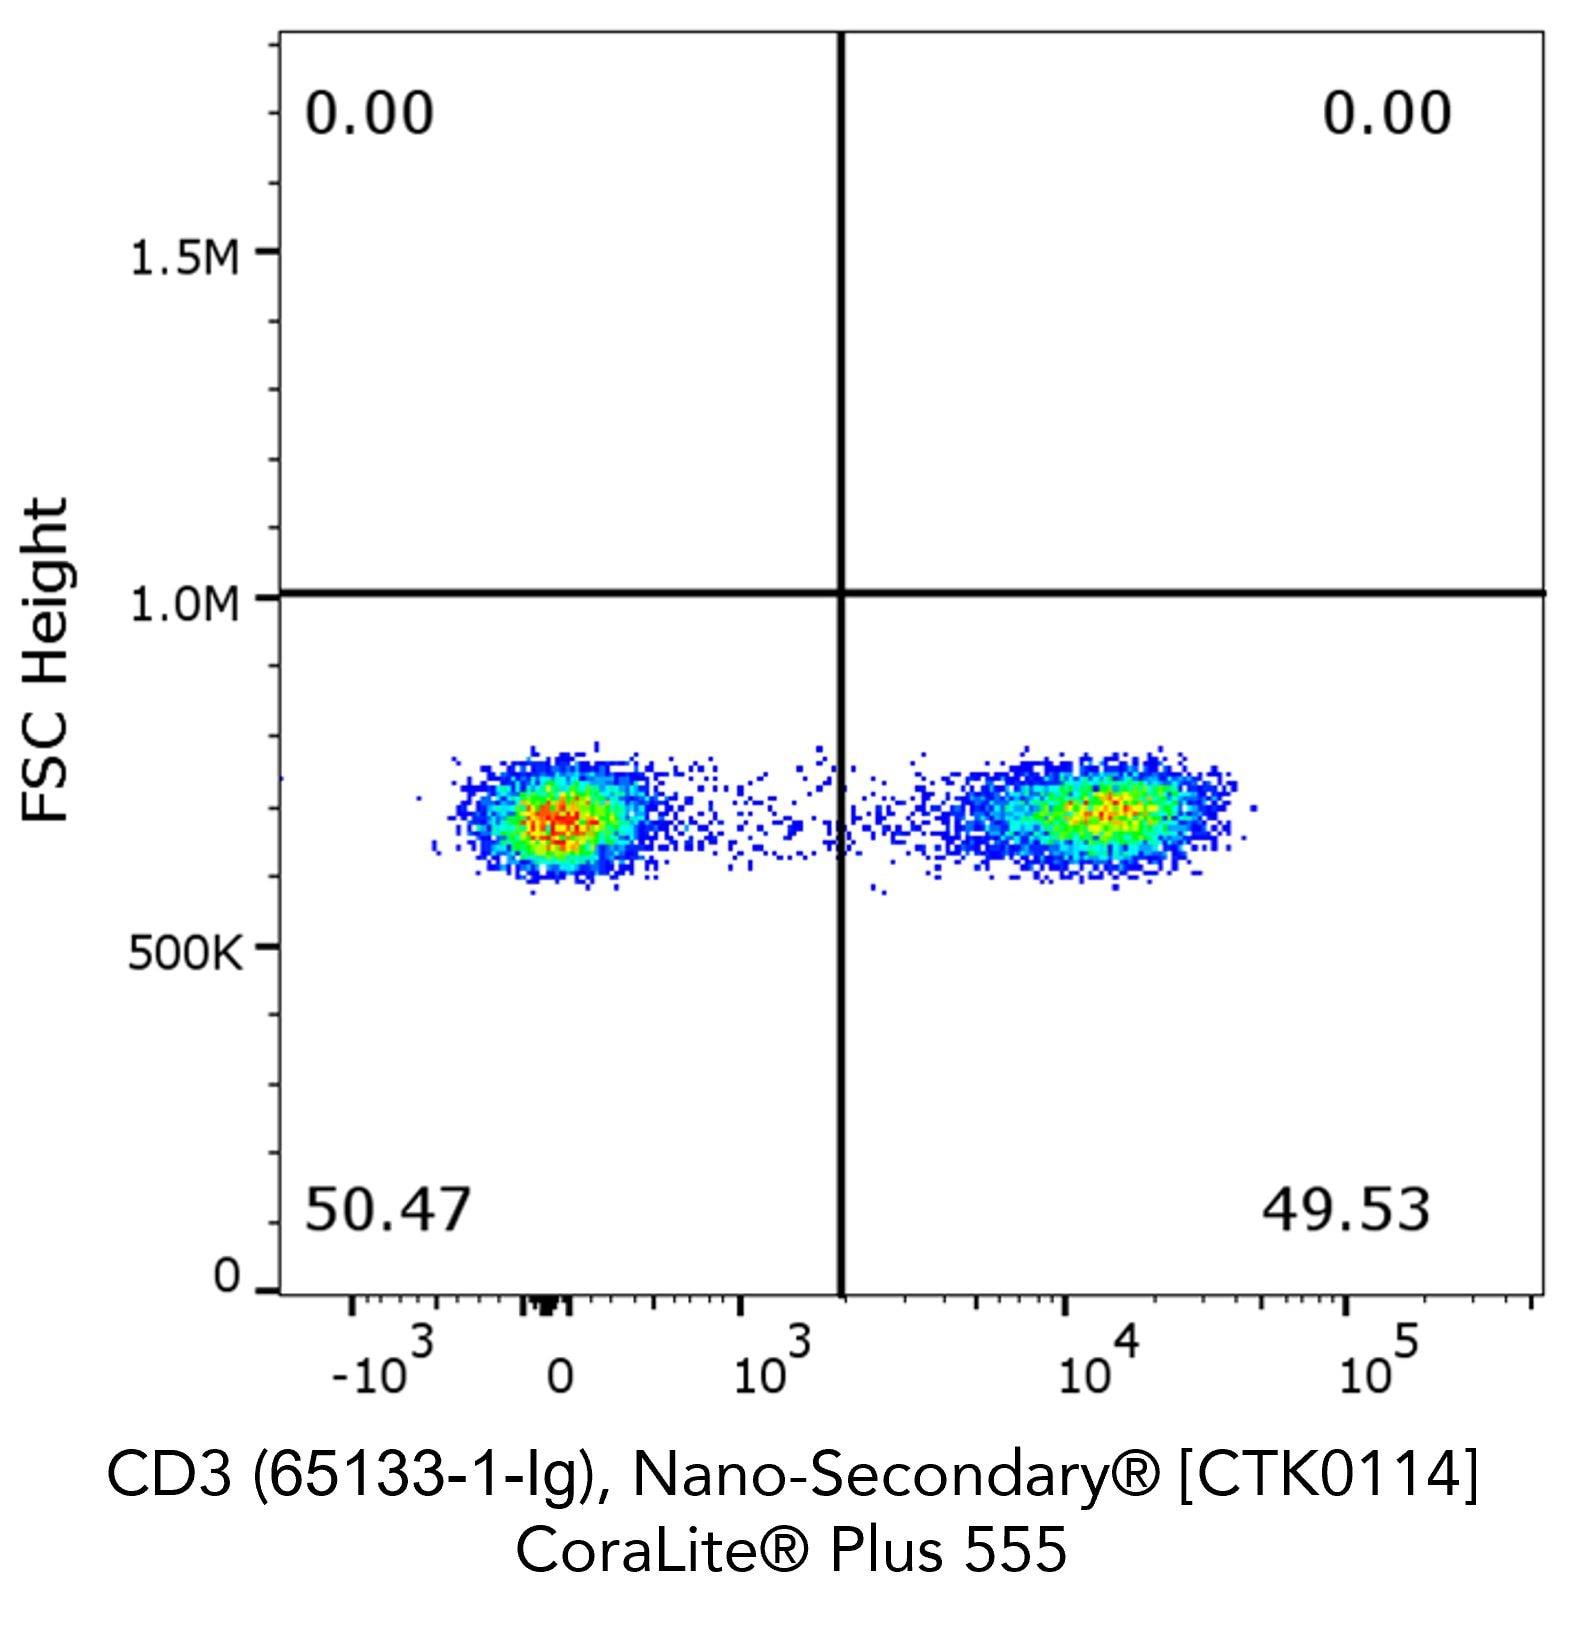 Flow cytometry analysis of 1X10^6 human peripheral blood mononuclear cells (PBMCs) stained with anti-human CD3 (clone OKT3, 65133-1-Ig) and Nano-Secondary® alpaca anti-mouse IgG2a, recombinant VHH, CoraLite® Plus 555.